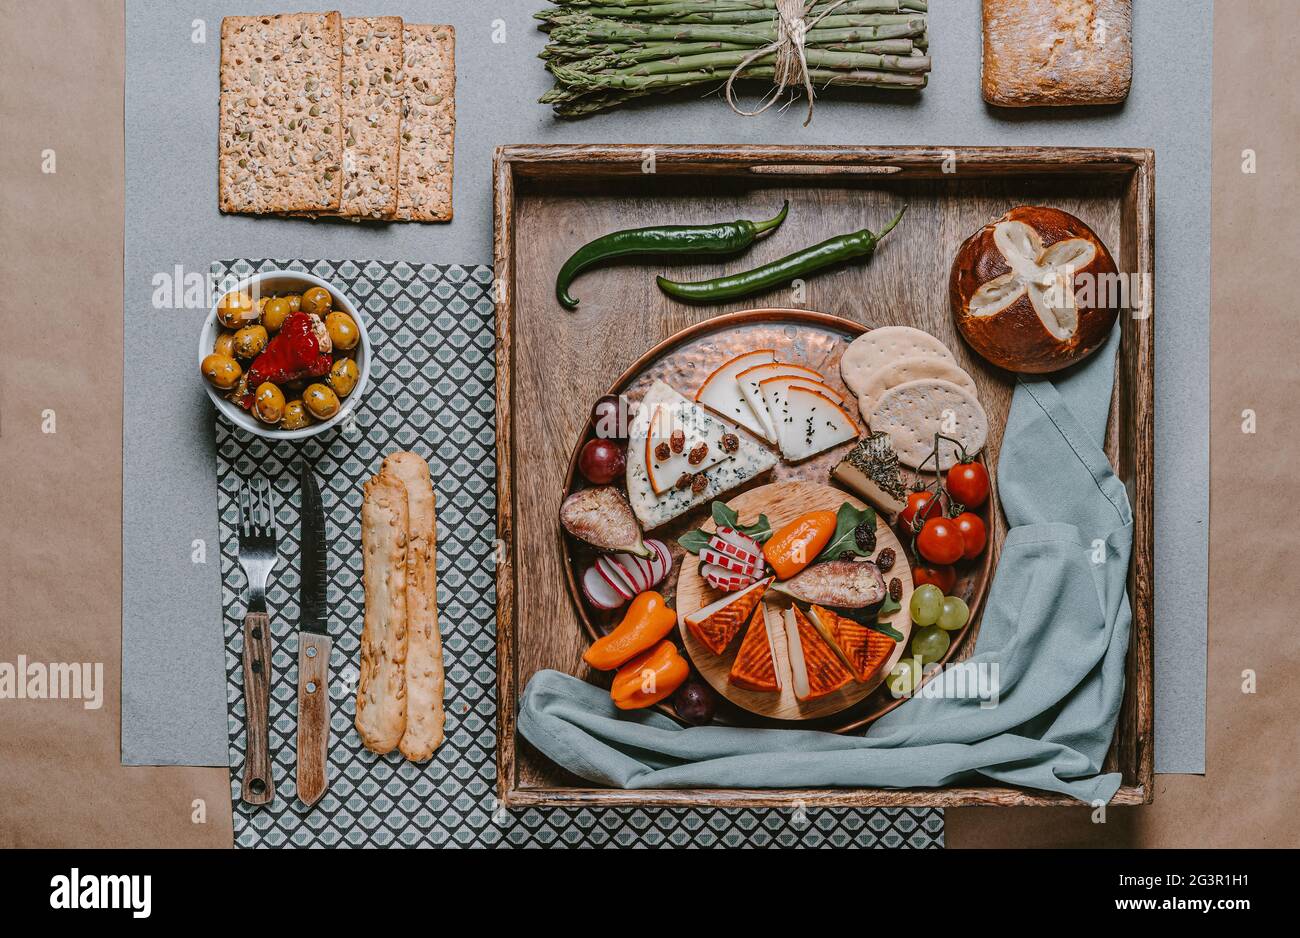 Food photography of cheese board with olives, crackers, cherry tomatoes, asparagus and peppers stuffed with cream cheese on a wooden tray. Mediterrane Stock Photo